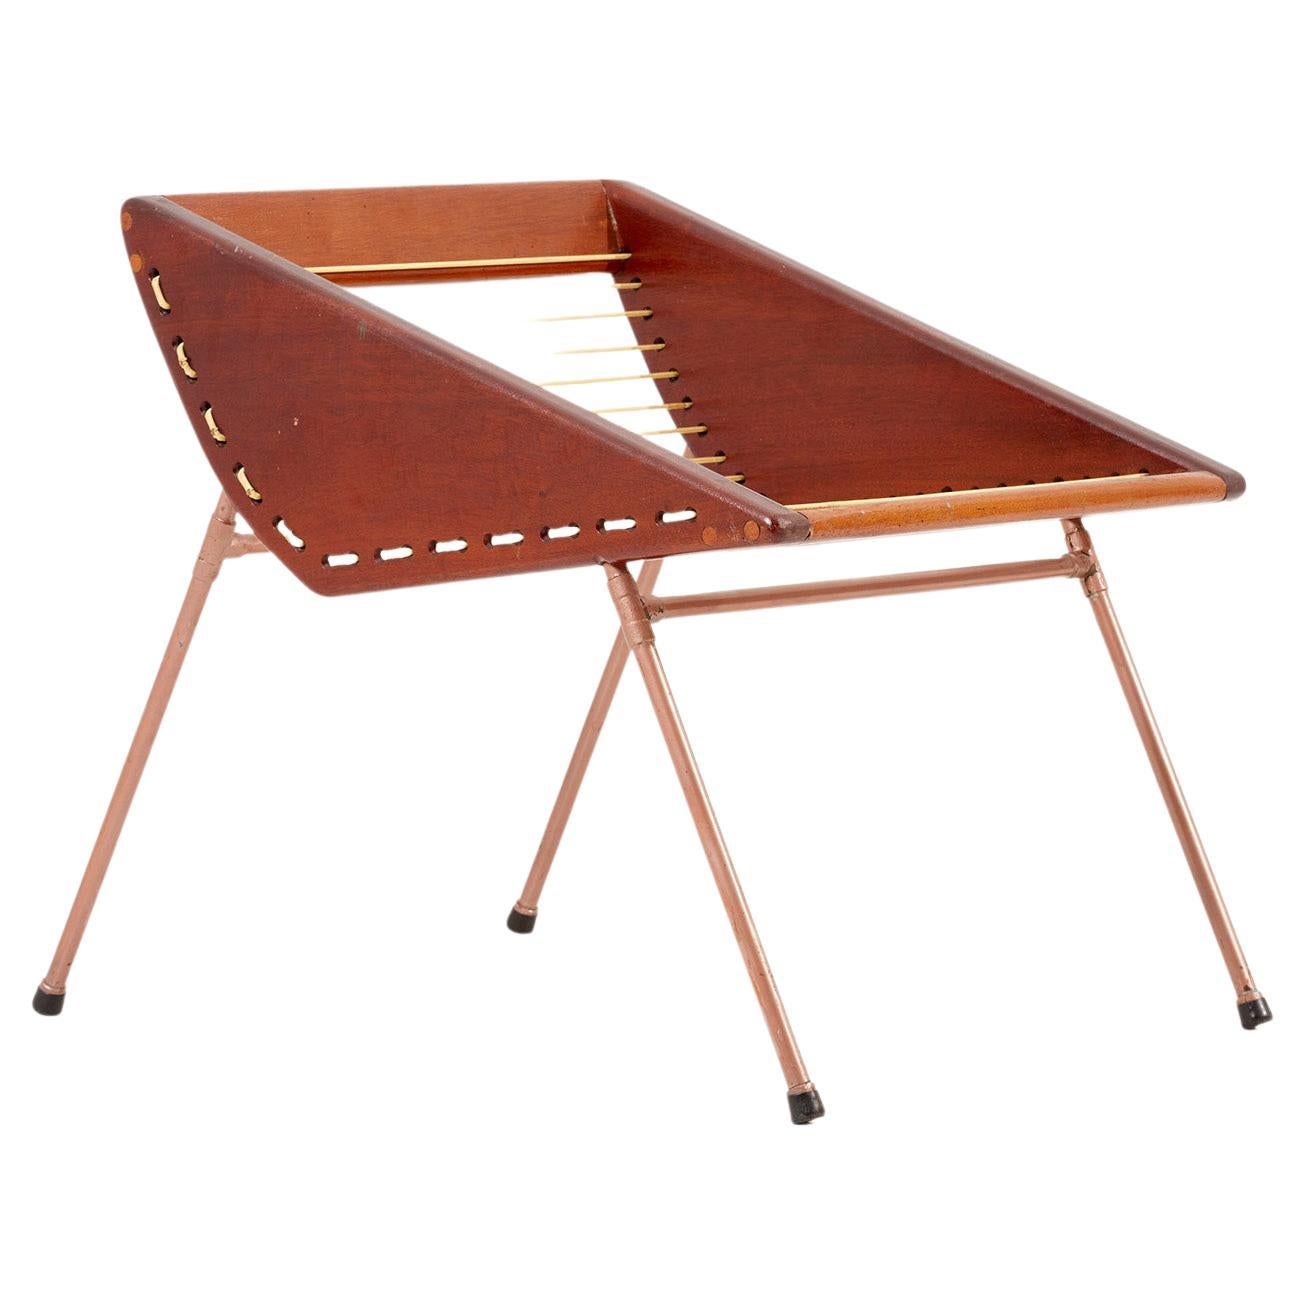 Unique Diy Mid Century Studio Stool with Copper Pipes and Webbing, USA, 1960s